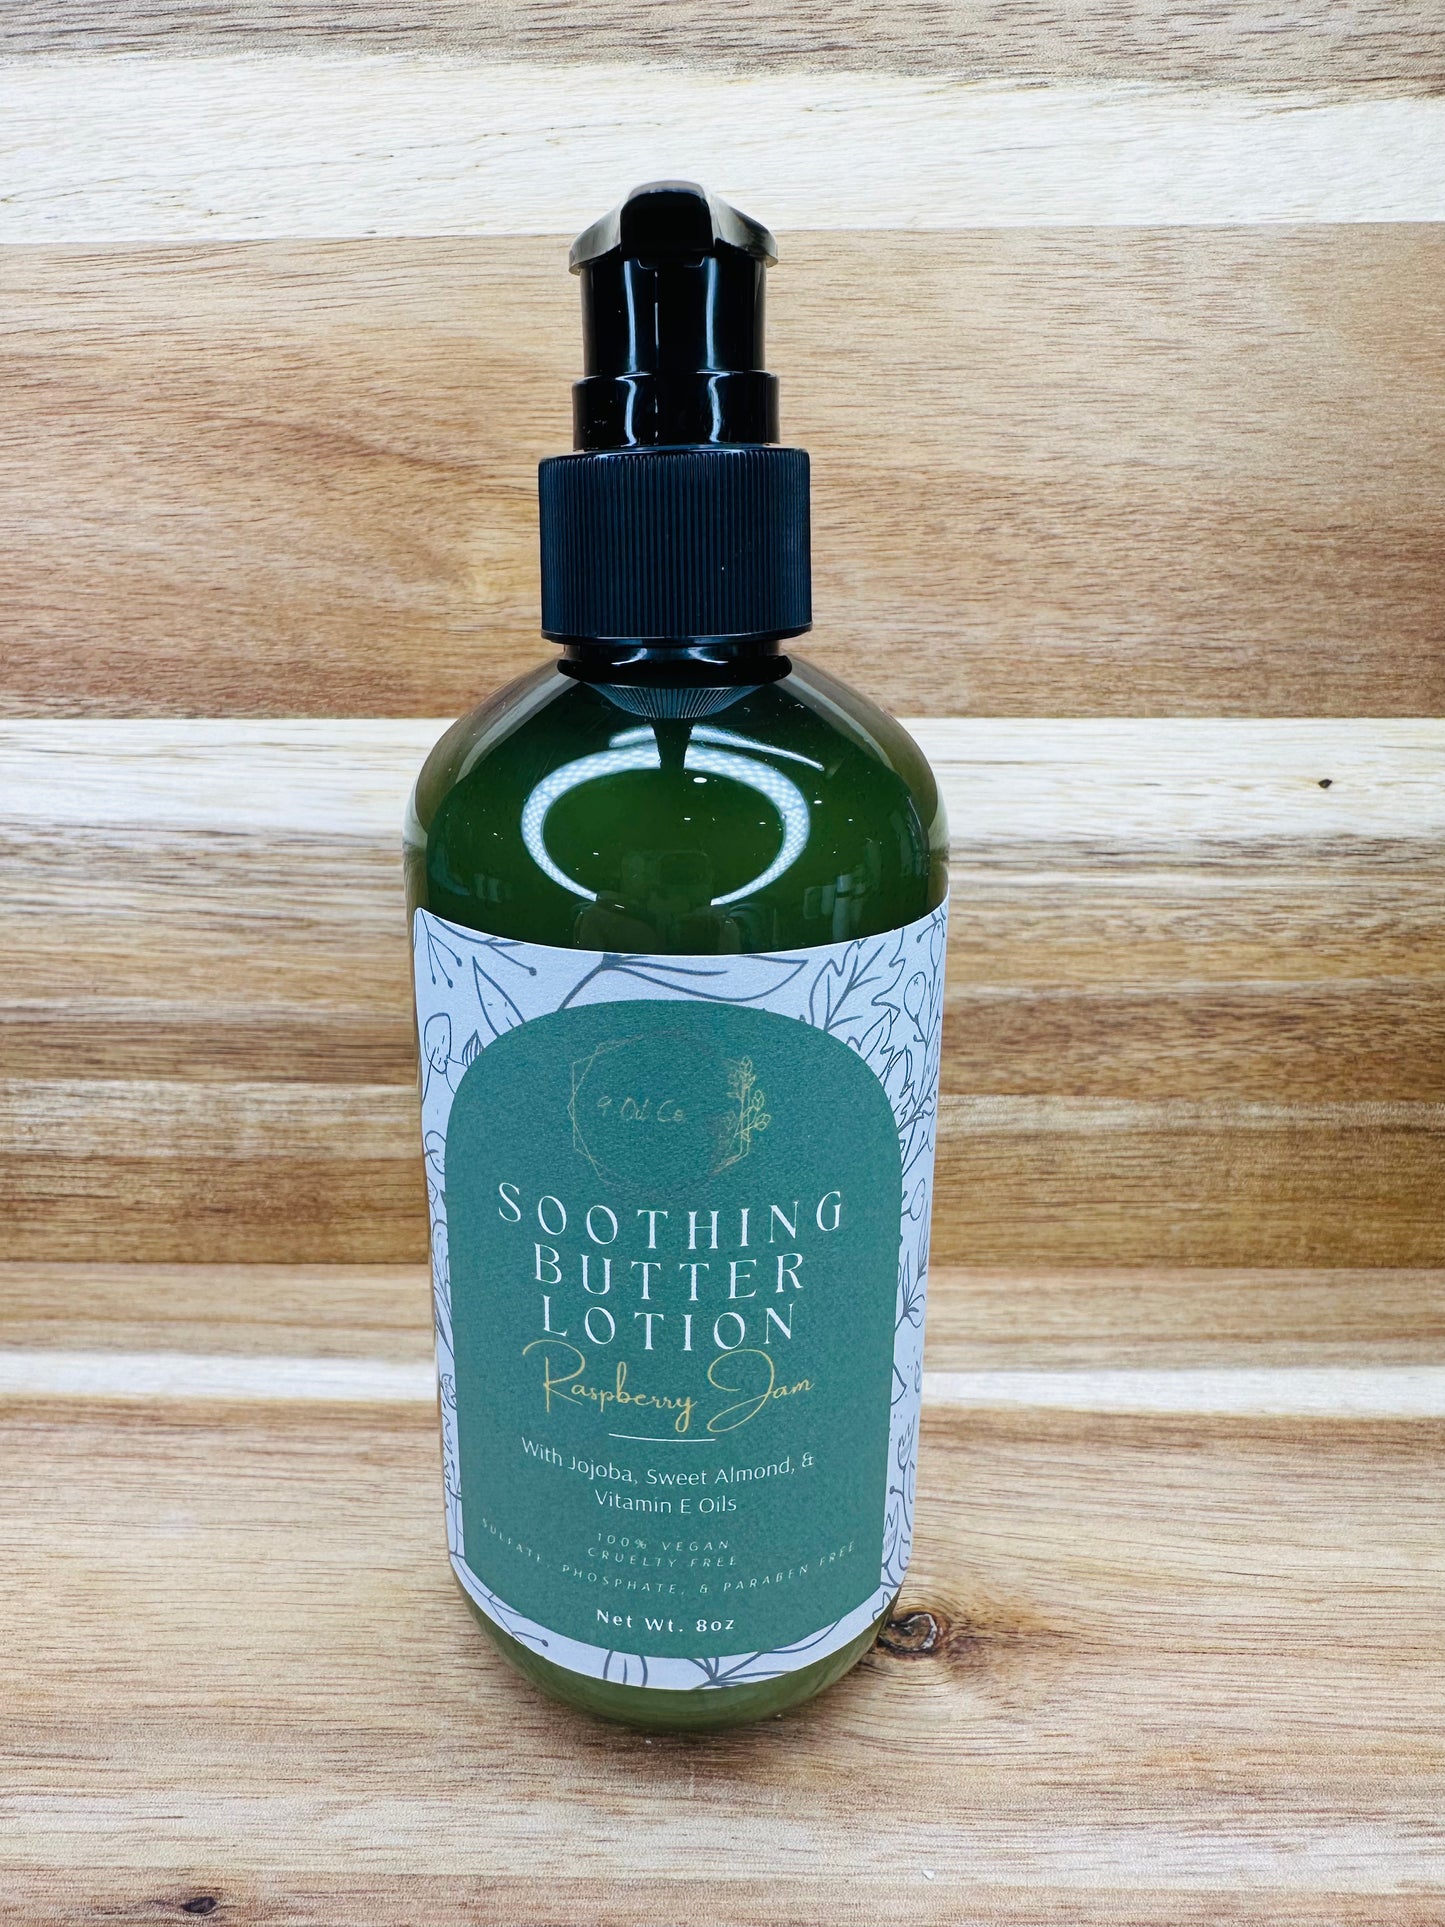 Soothing Butter Lotion